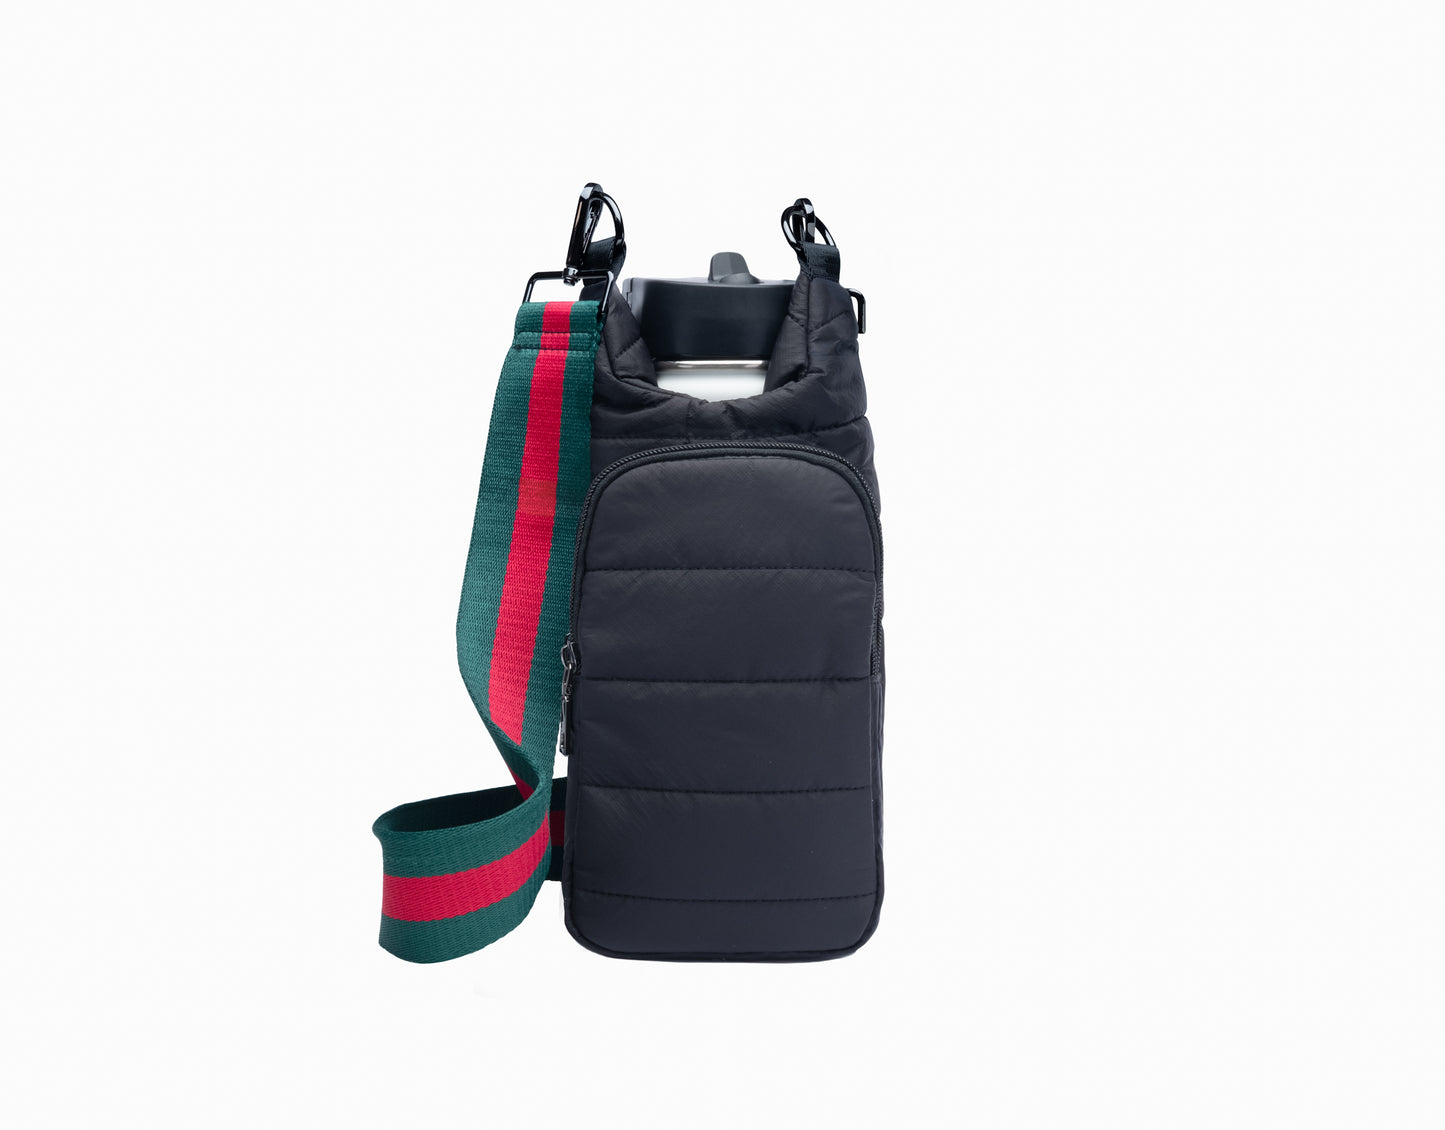 Wholesale - Black Matte HydroBag with Red/Green Strap